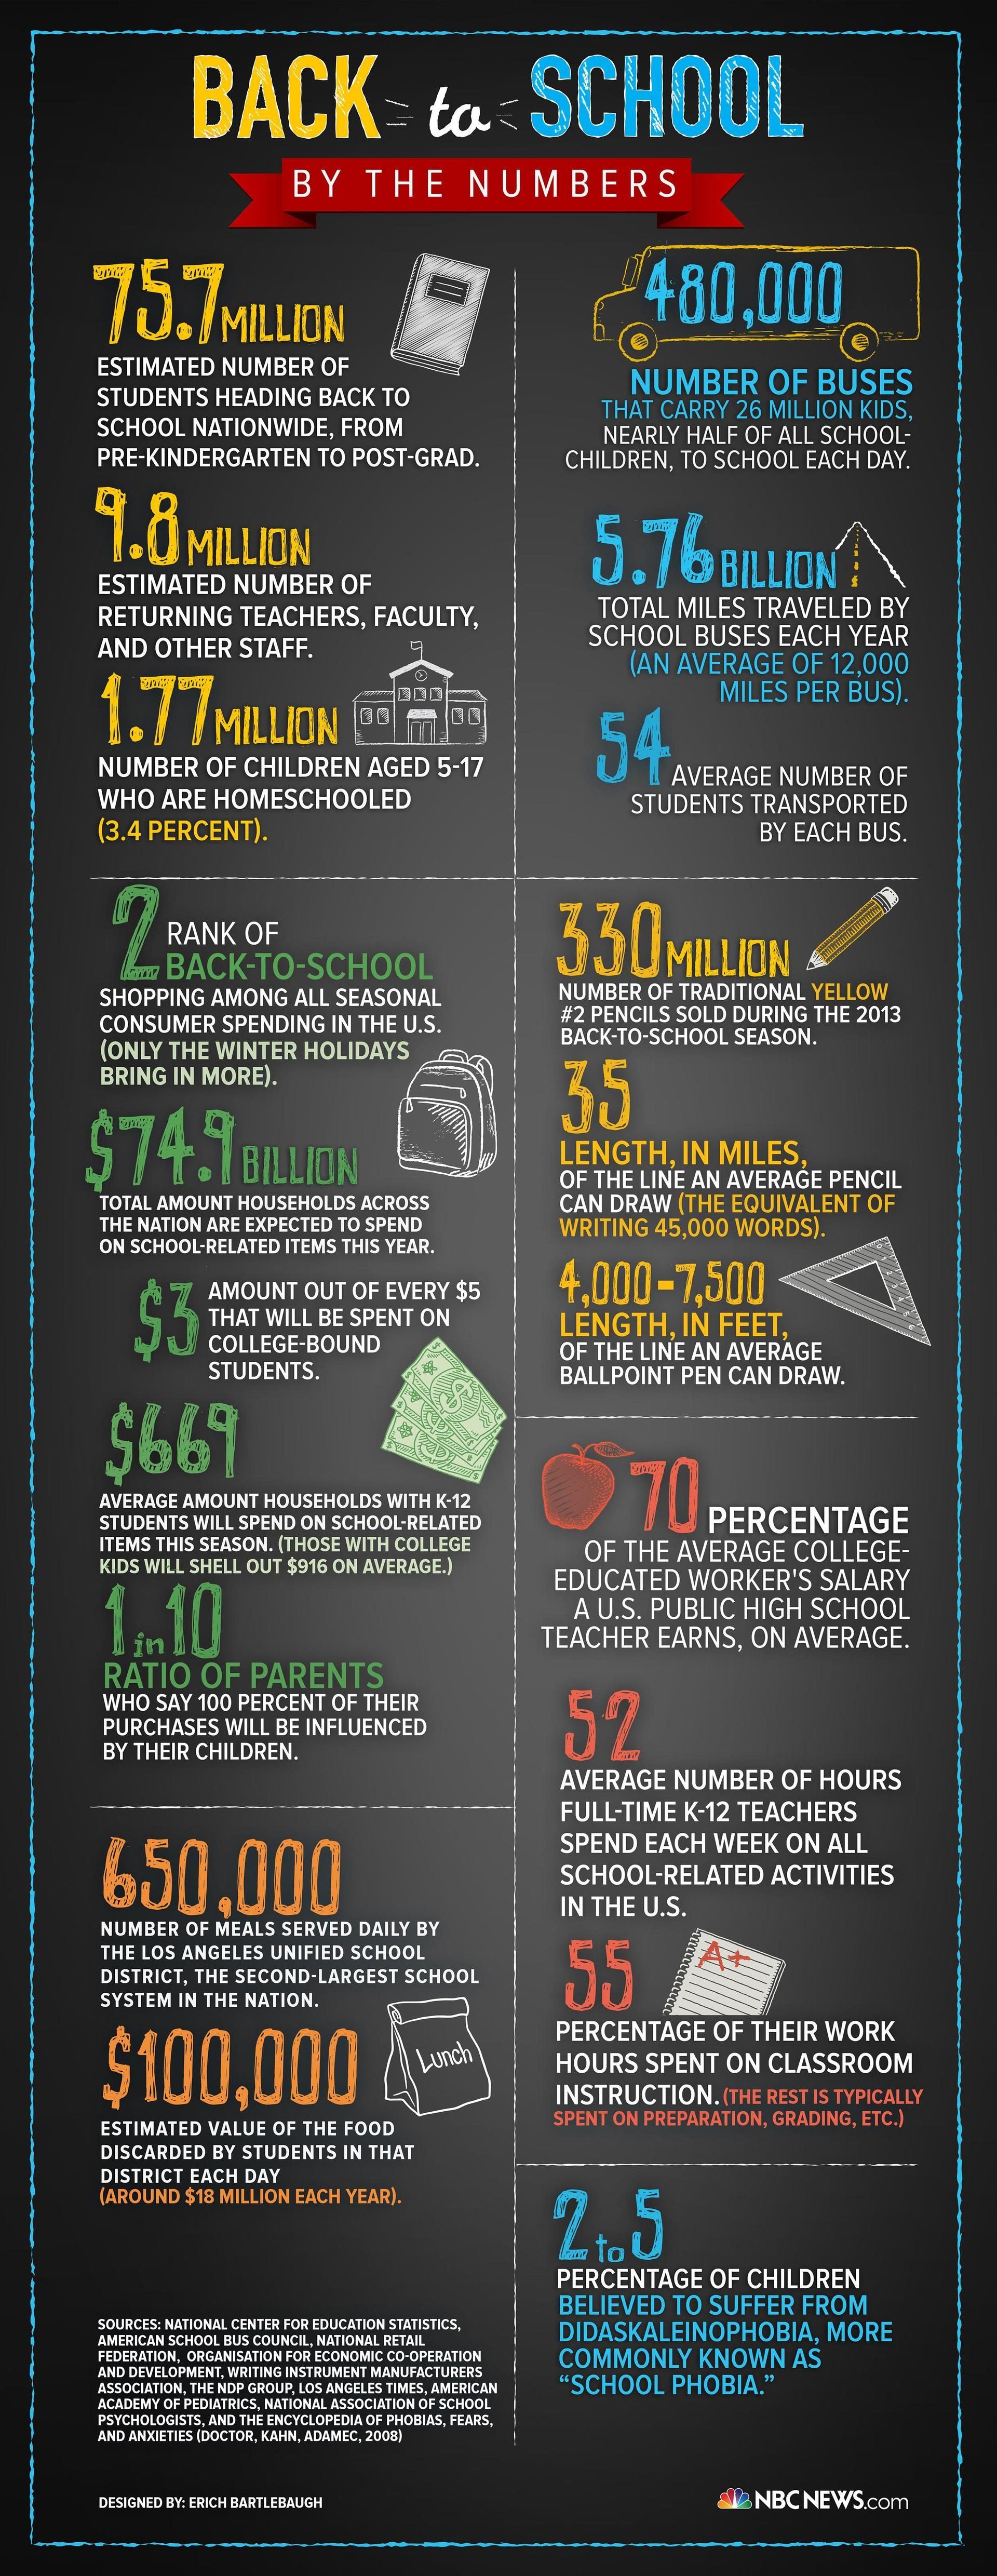 Back to School Infographic by the Numbers